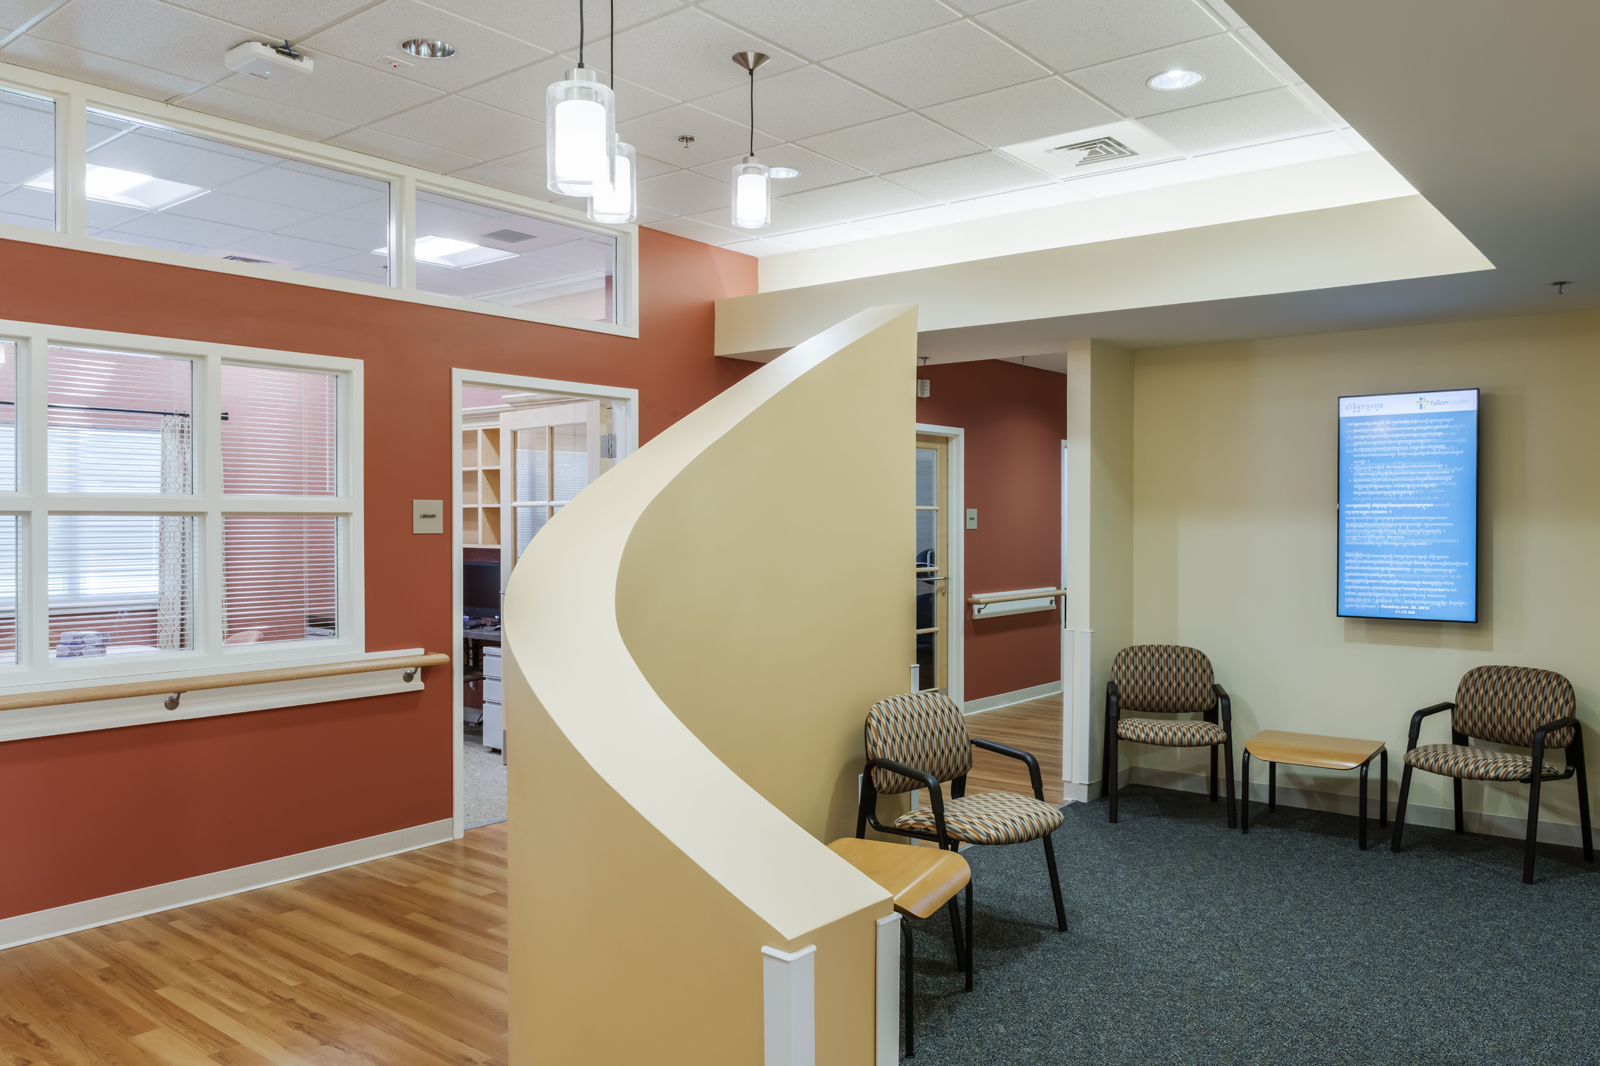 Interior designers at WDC created this warm and bright reception area in an adult day care center